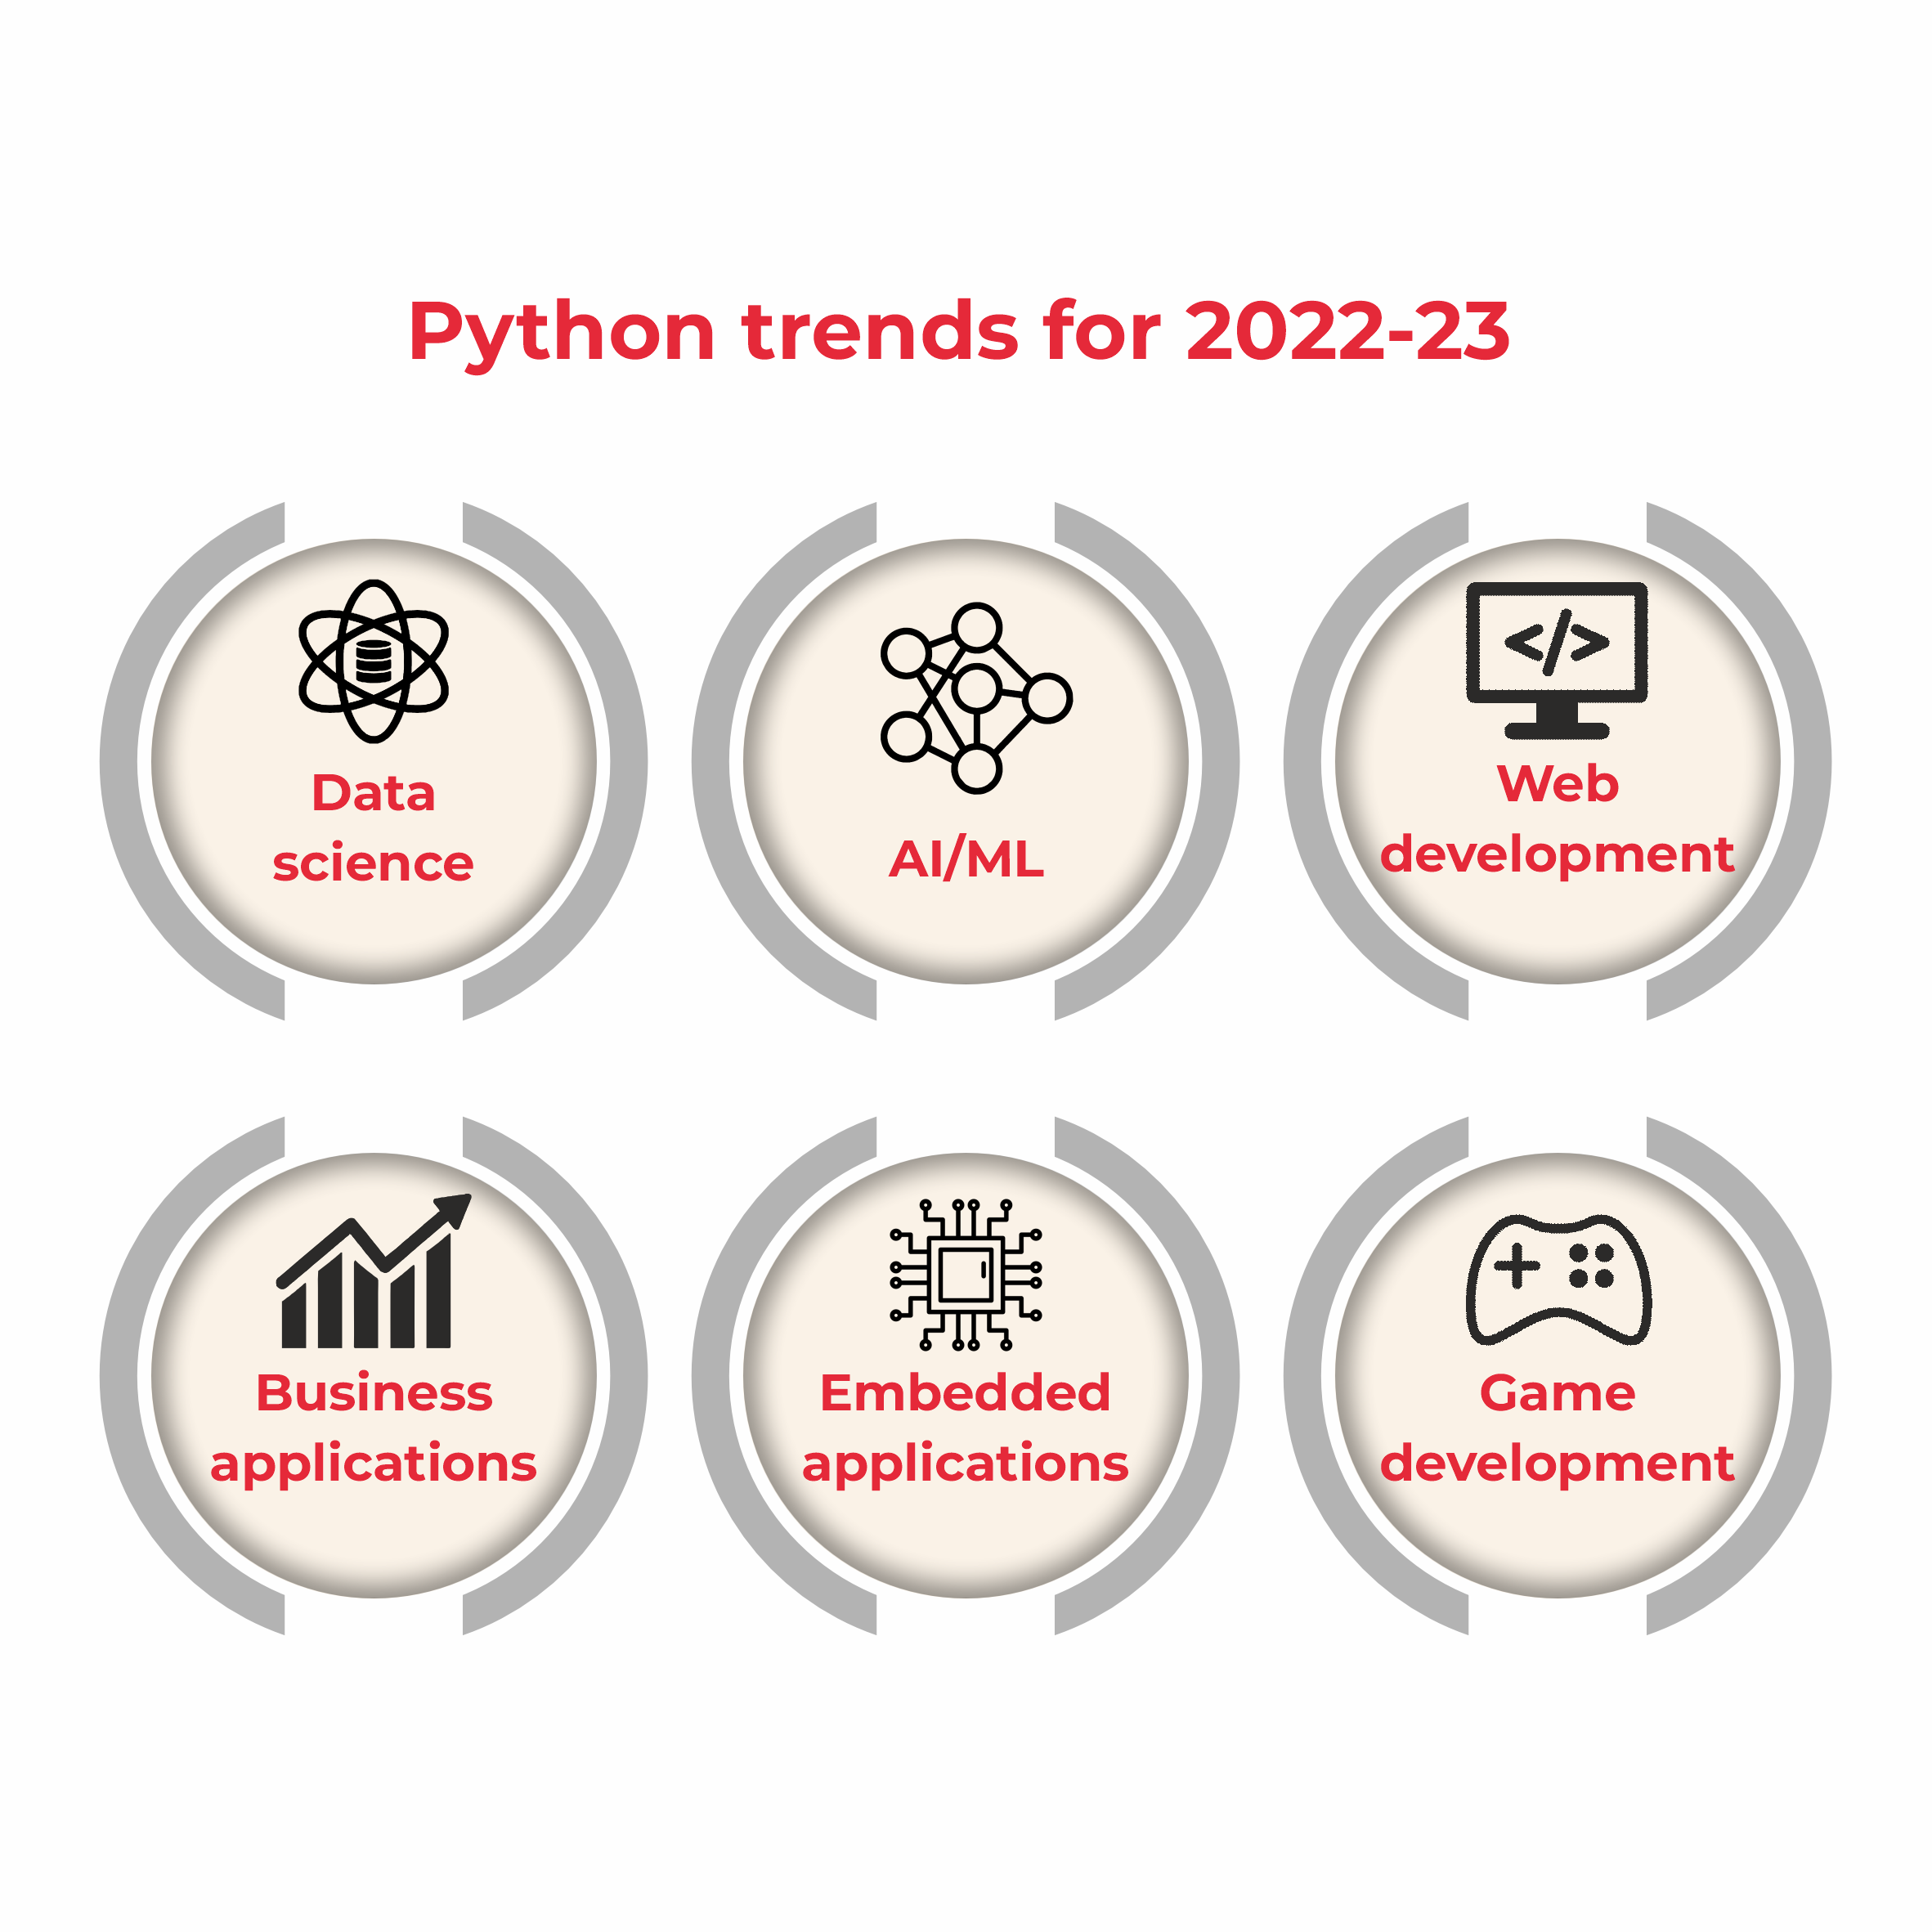 Python trends for 2022-23